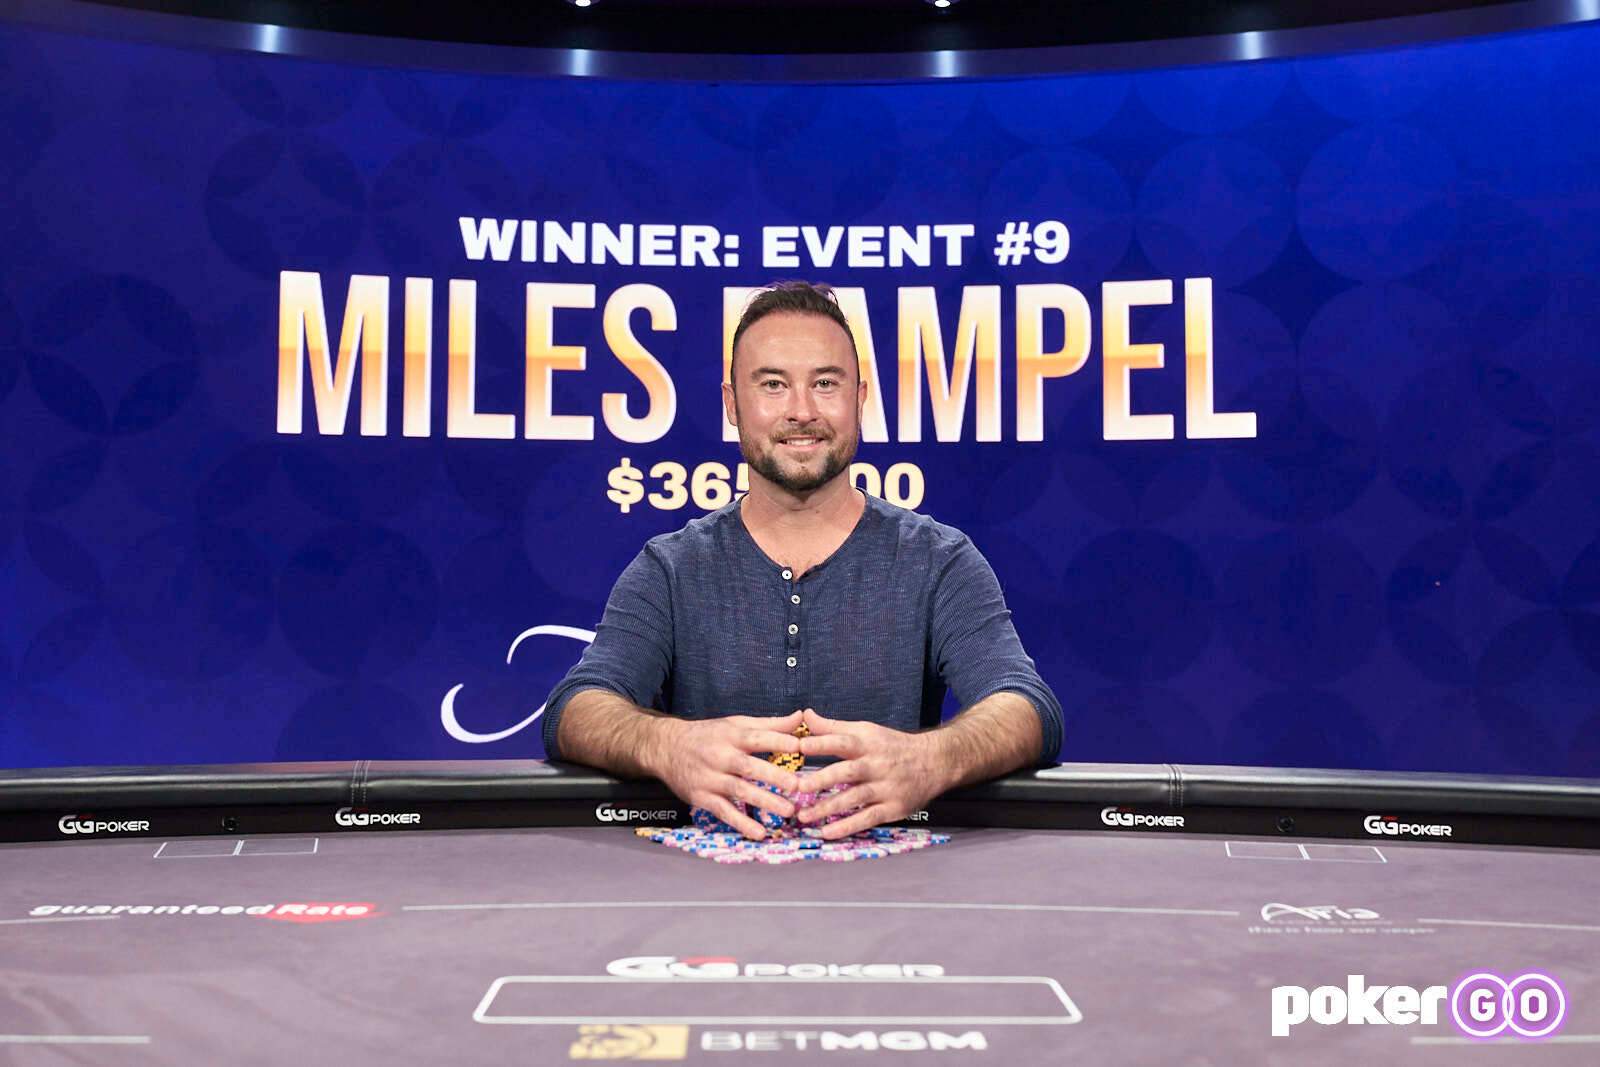 Miles Rampel Wins Event #9: $25,000 PLO at the 2021 Poker Masters for $365,500